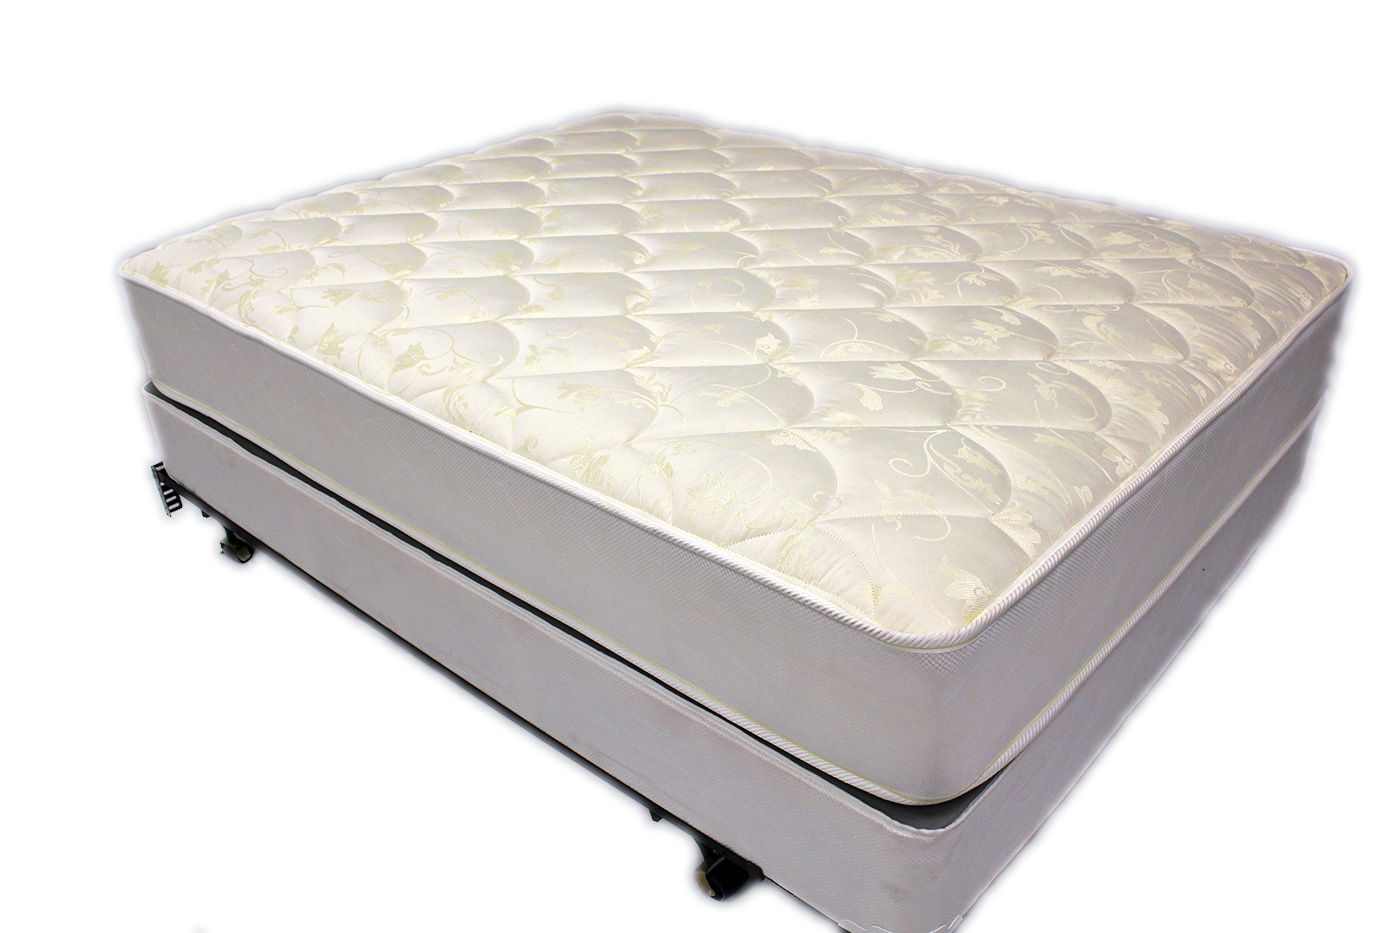 extremely cheap twin mattresses in tampa